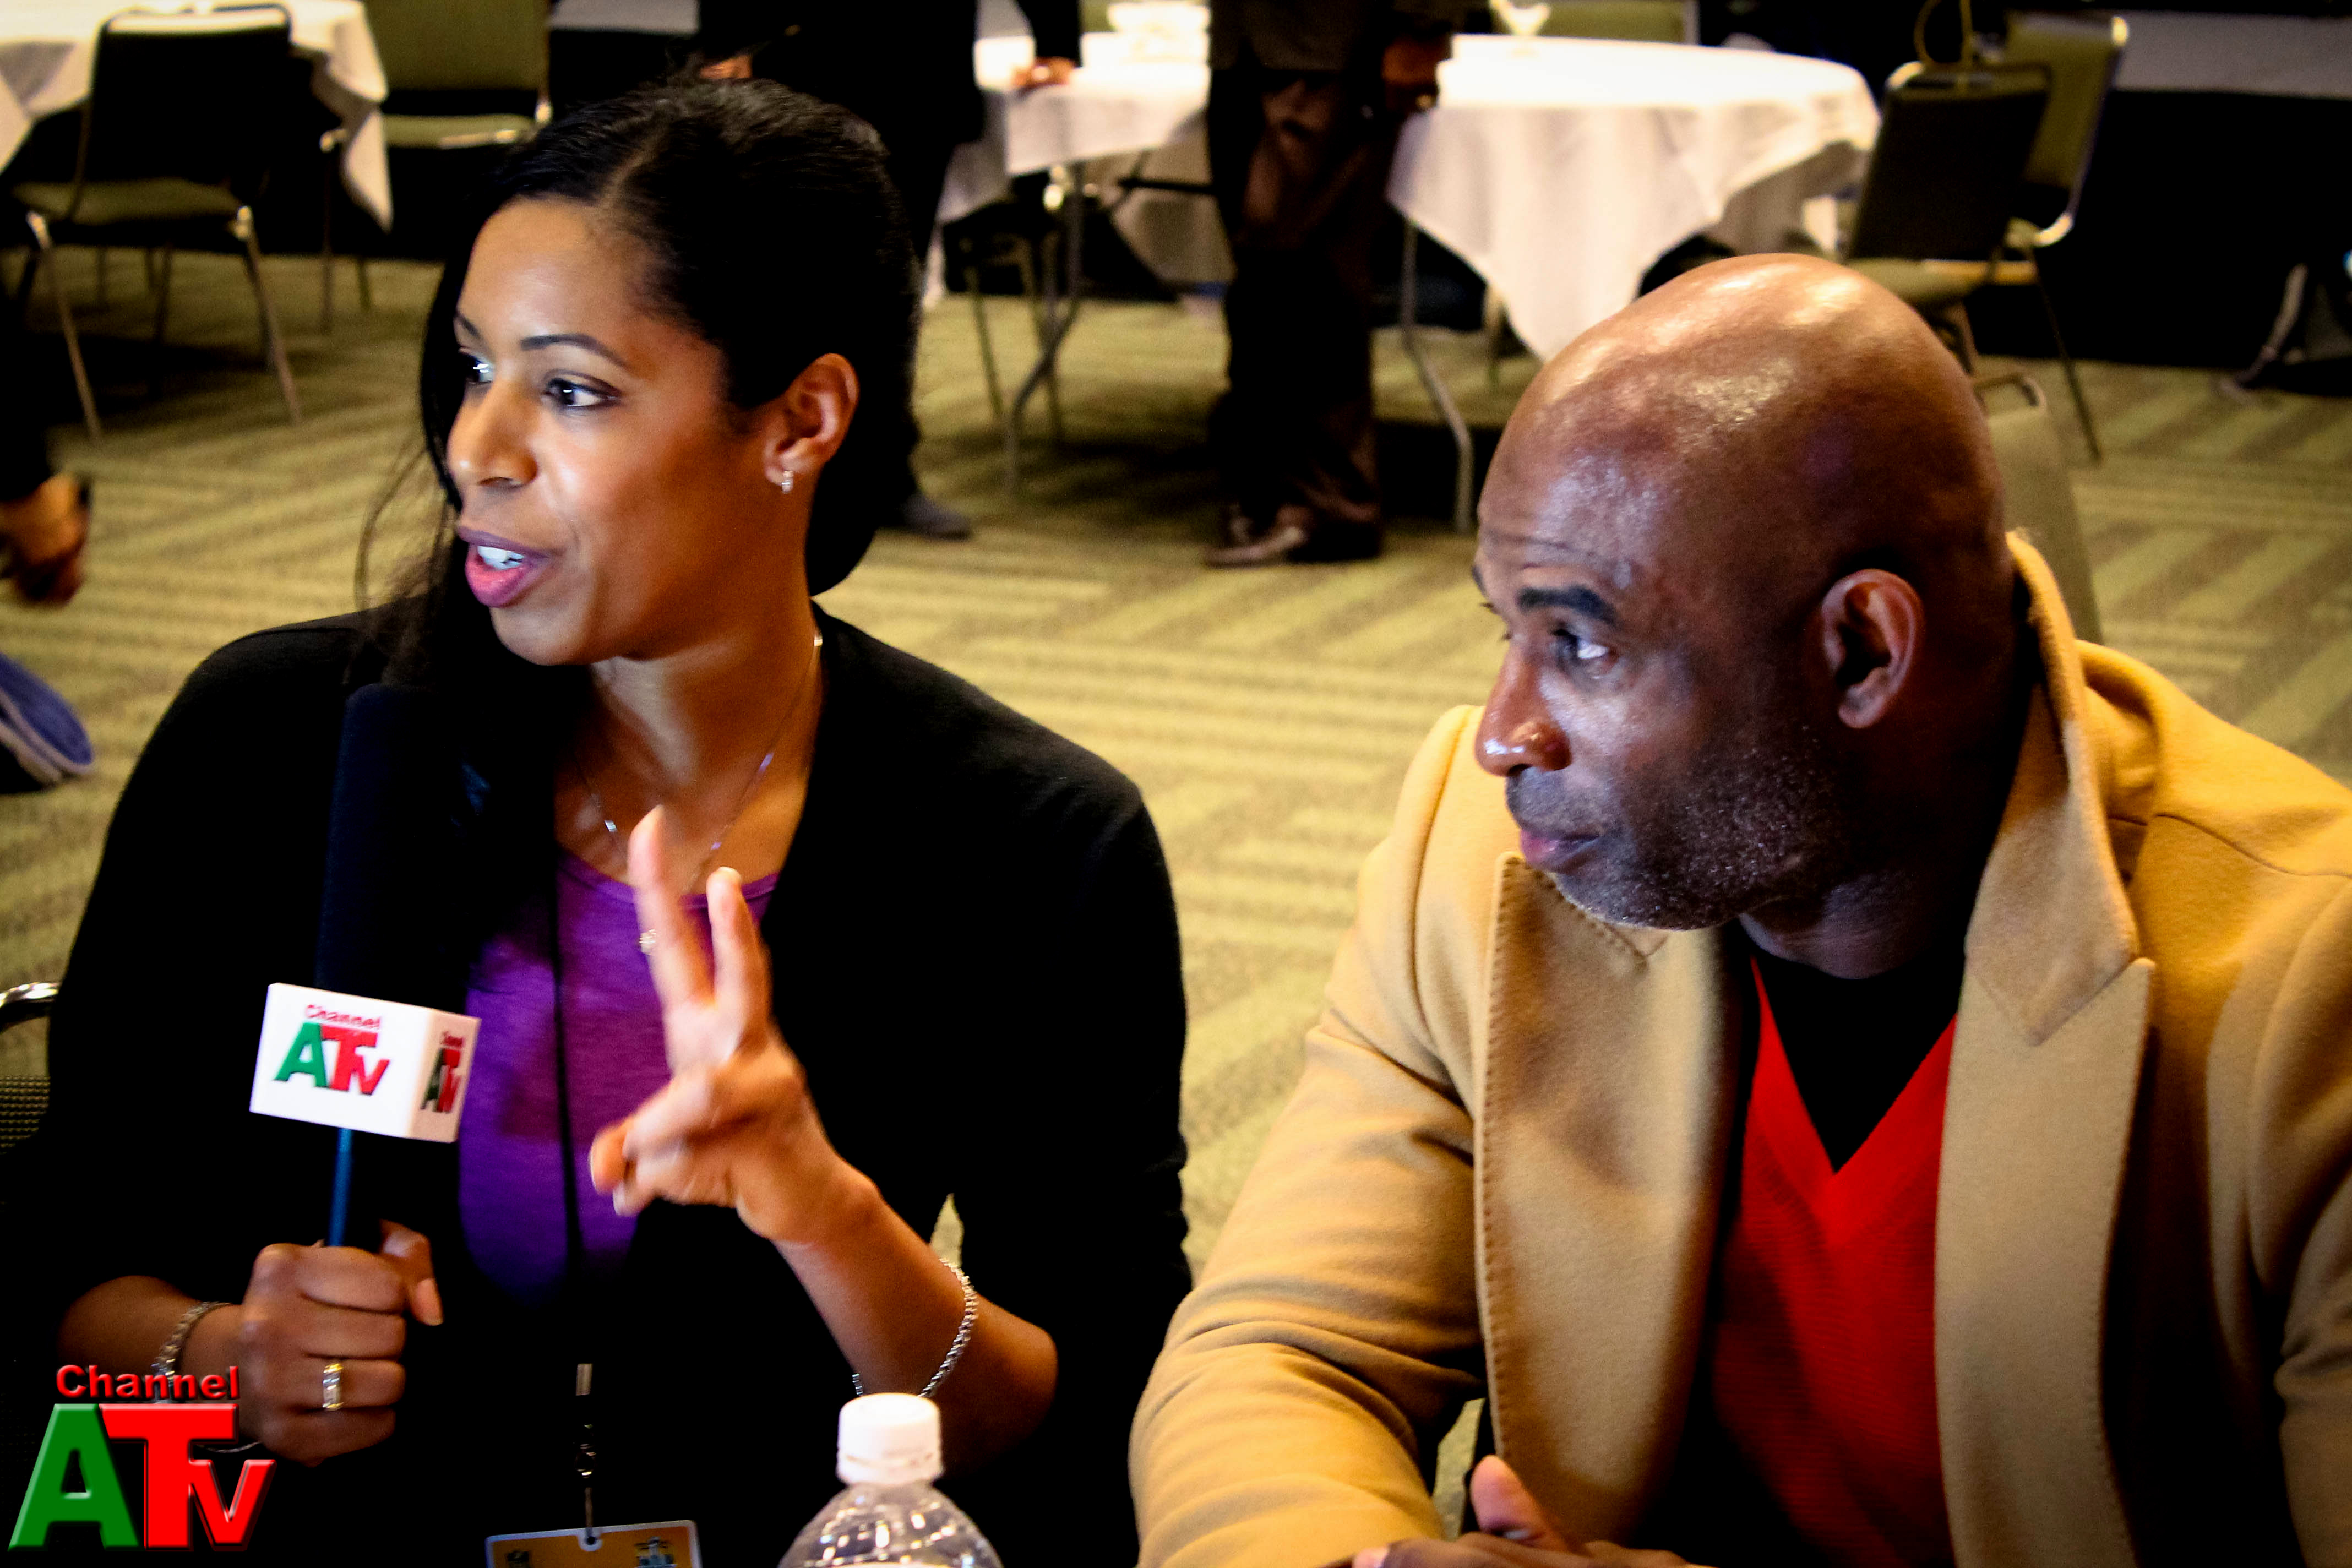 Deion Sanders interviews with Channel A TV at Super Bowl 50